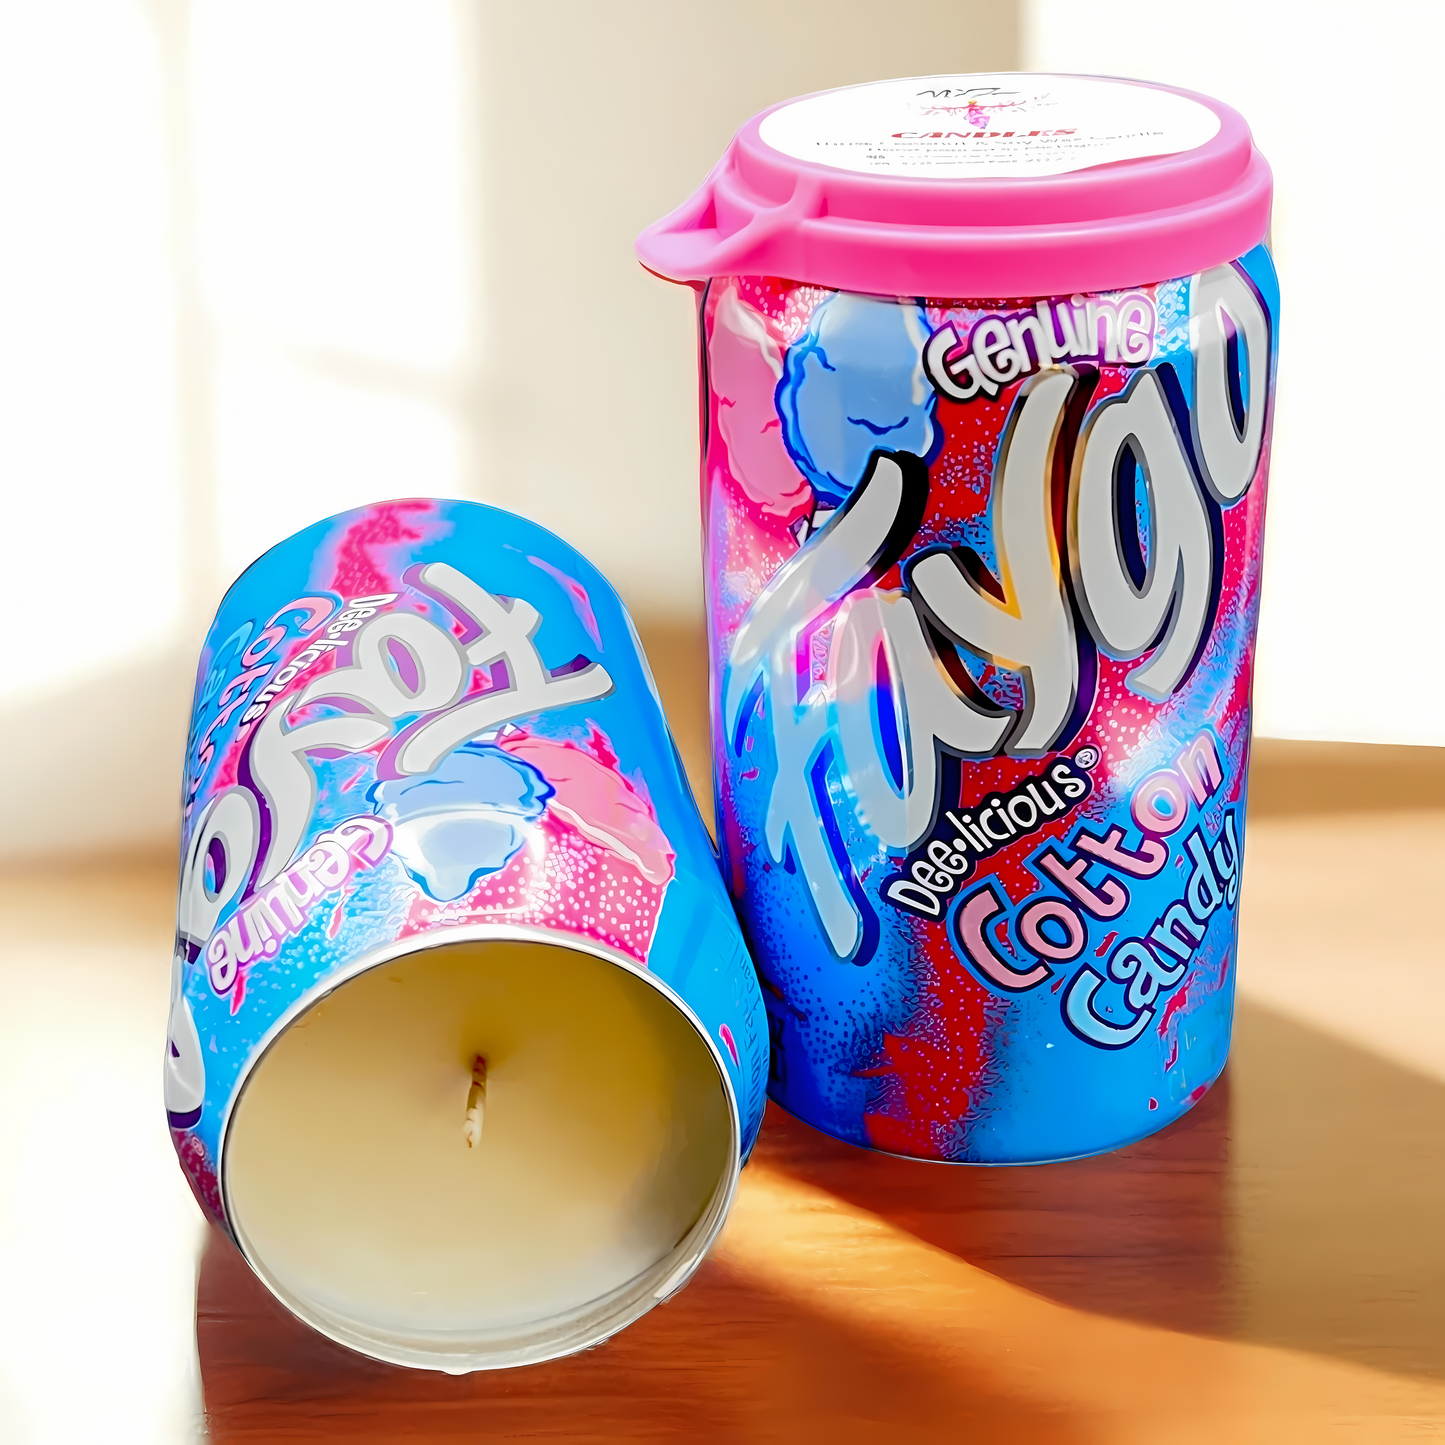 Faygo Cotton Candy Can Candle